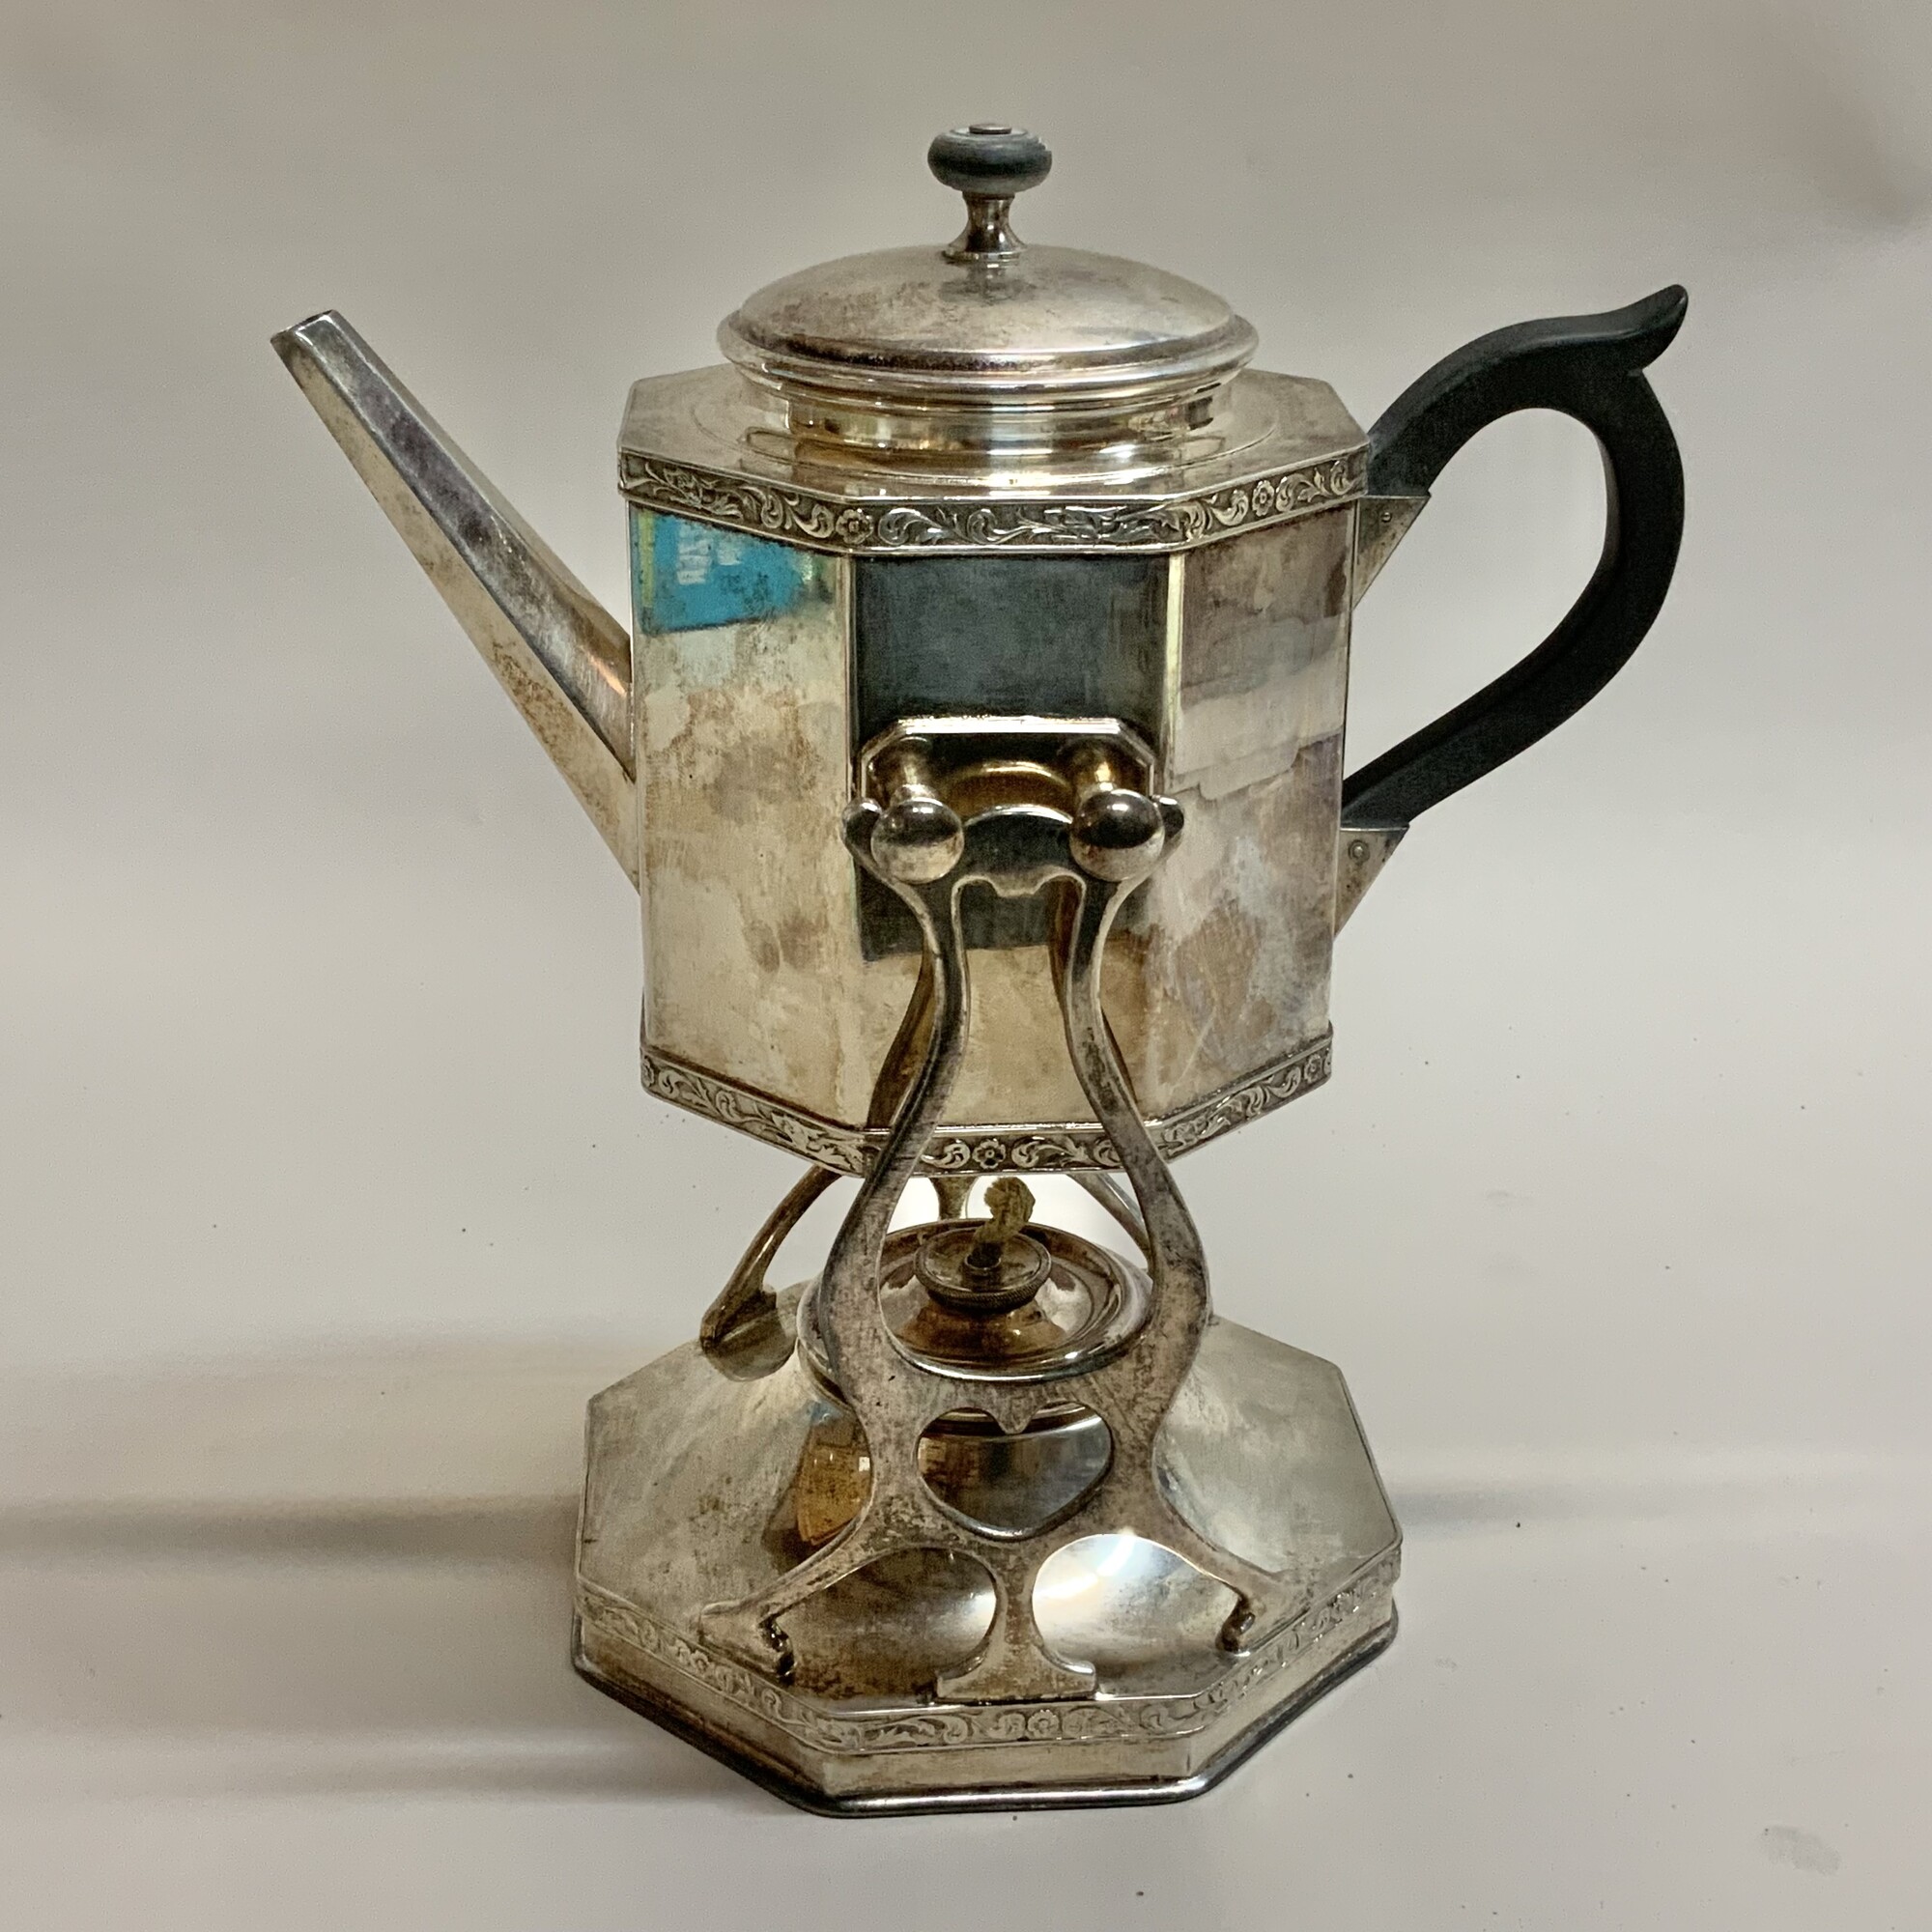 Vintage silver plated hot water kettle with stand and burner Used to keep water hot for the preparation of tea at the table
Marked on the bottom of kettle see photo
In fair condition has been vigorously polished over its lifetime and the silver plate is quite thin Black color handle and finial on lid have faded No dents or deep scratches still a very decorative piece
Kettle and stand are 10.5 inches high